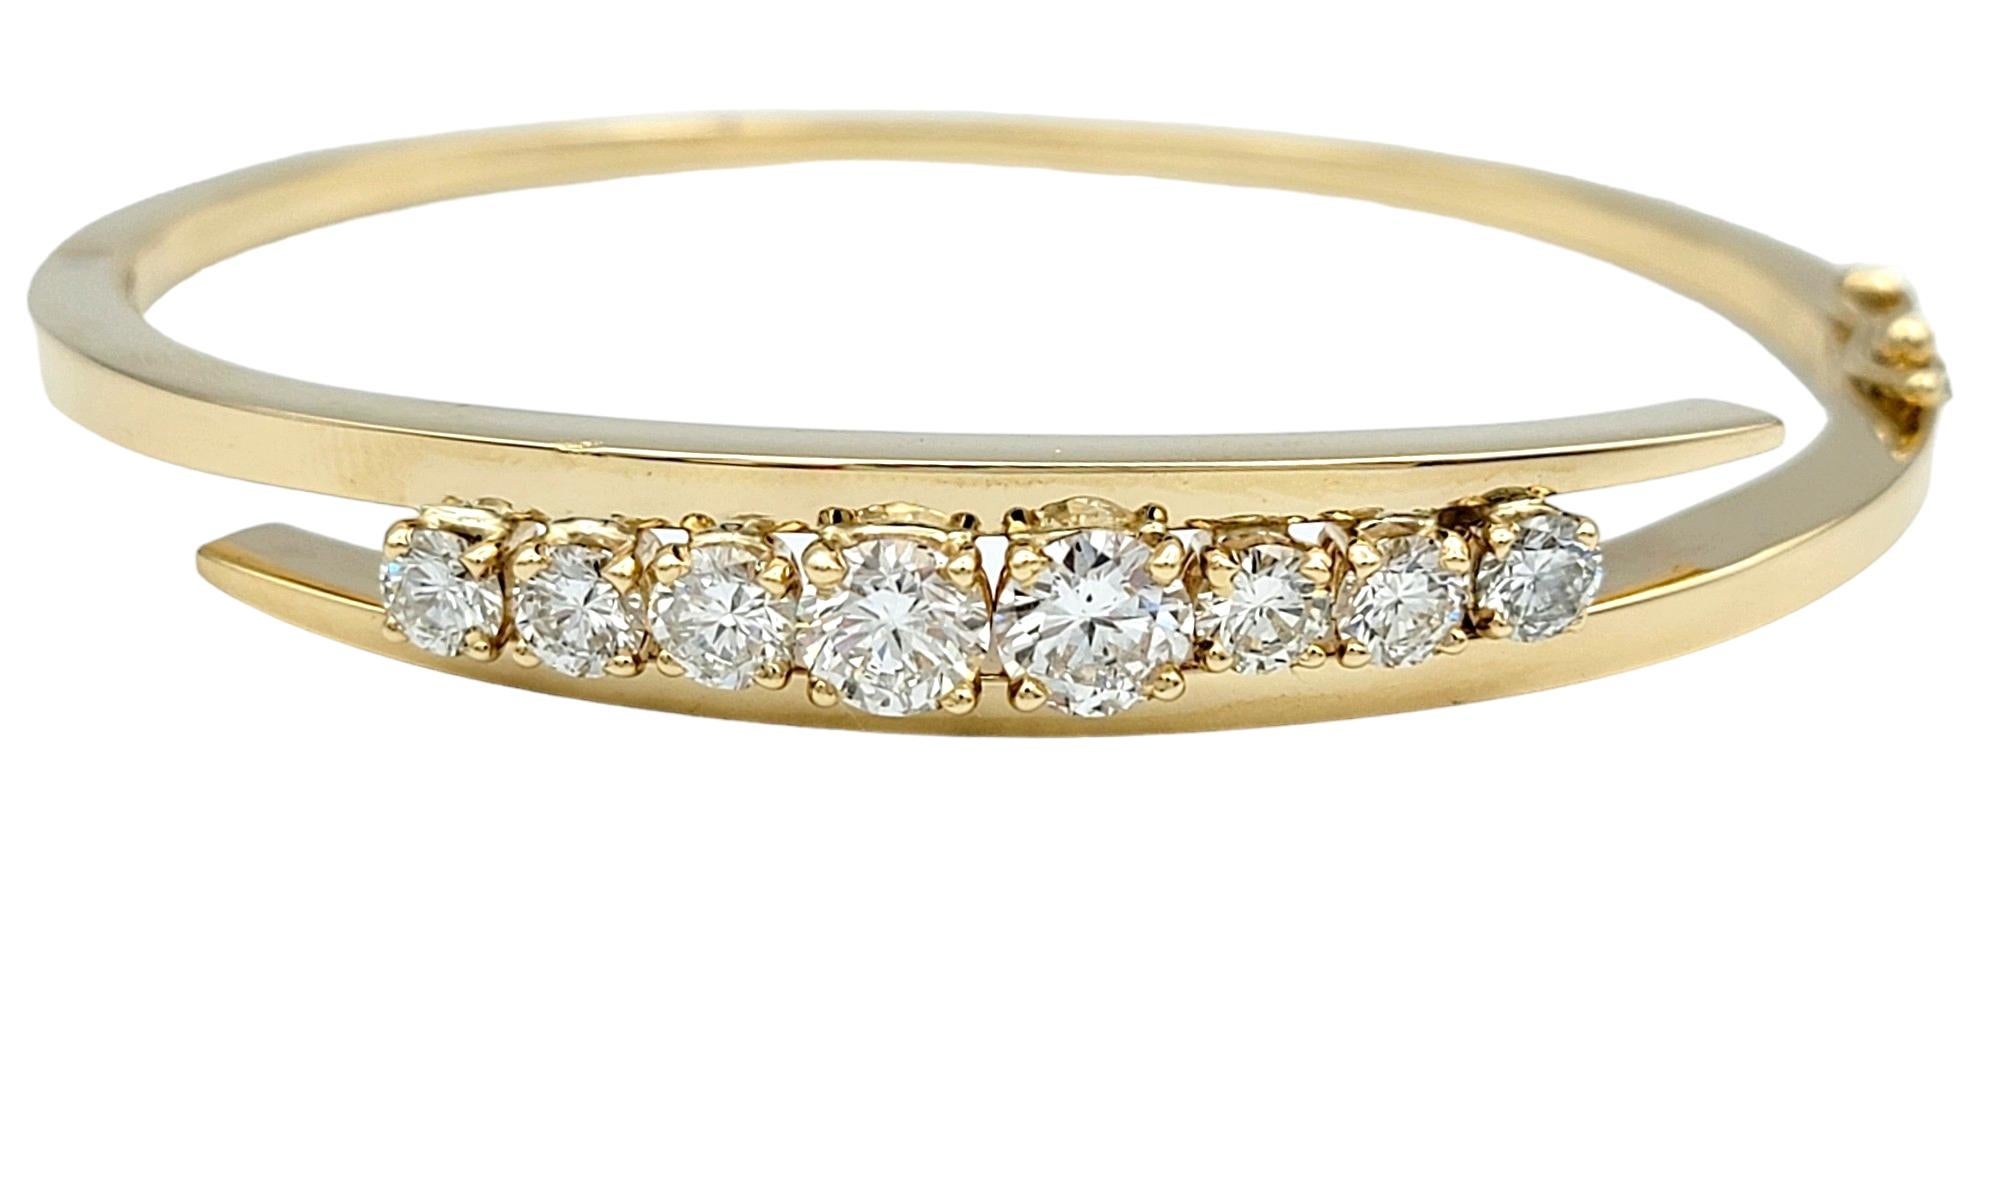 This elegant hinged bangle bracelet exudes sophistication and glamour, crafted in lustrous 14 karat yellow gold. Its timeless design features a bypass style, where the ends of the bracelet gracefully overlap, creating a fluid and dynamic silhouette.